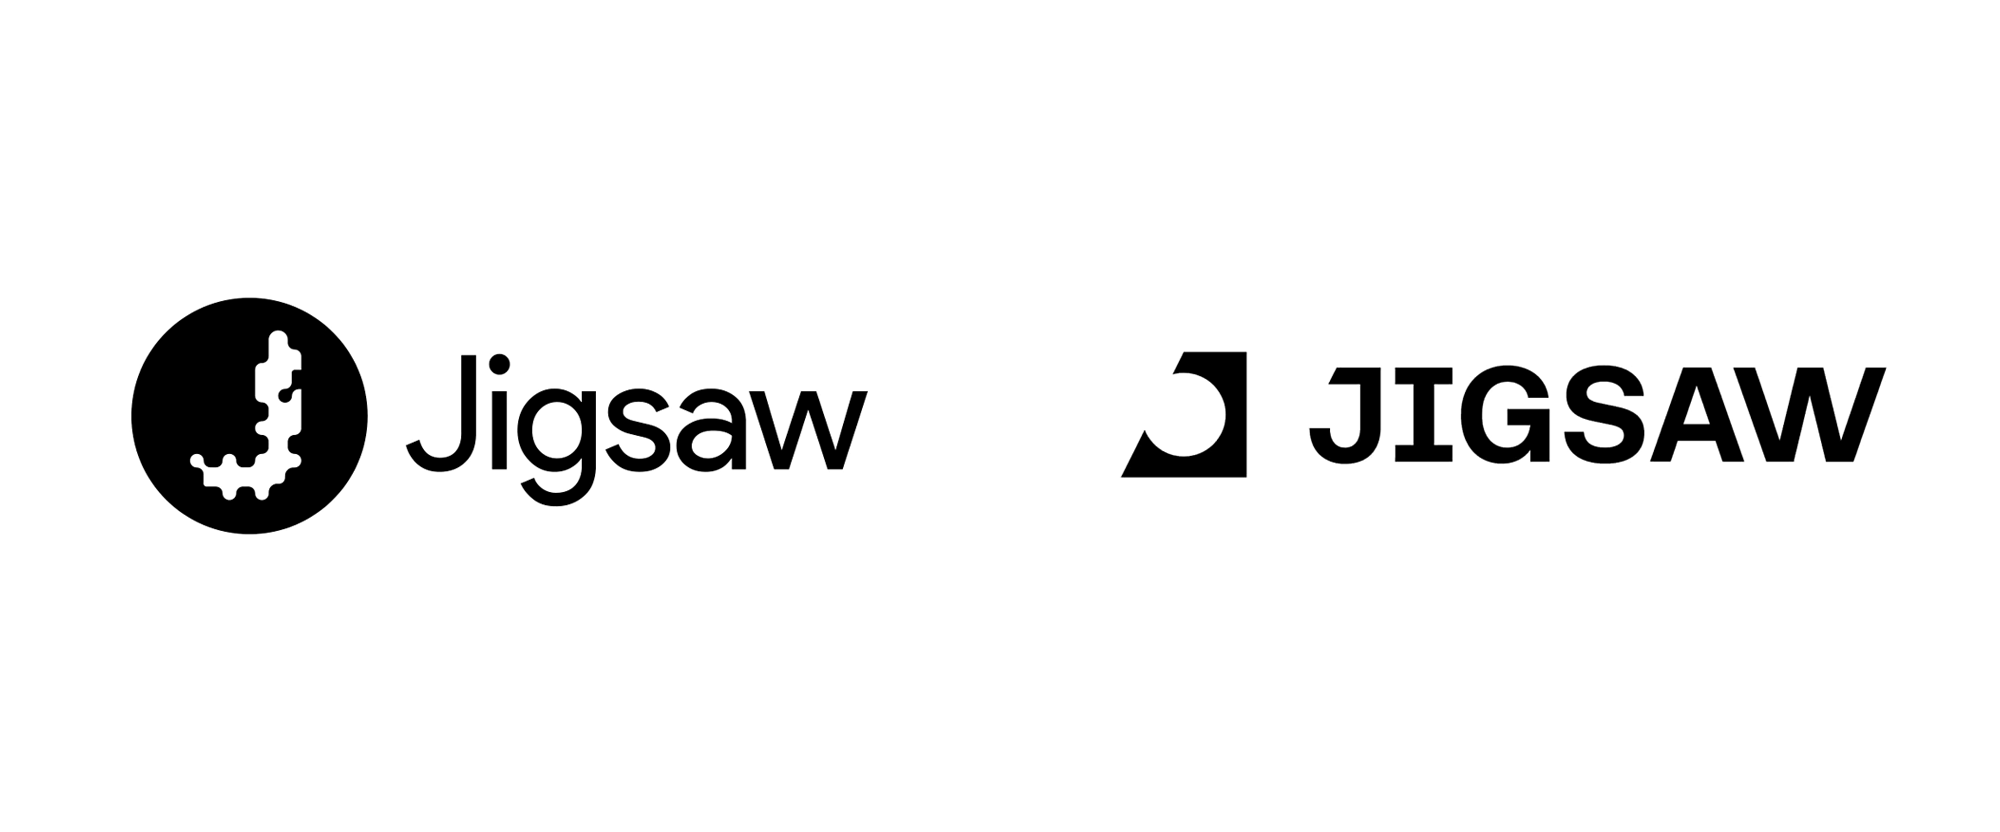 Reviewed New Logo and Identity for Jigsaw by Upperquad